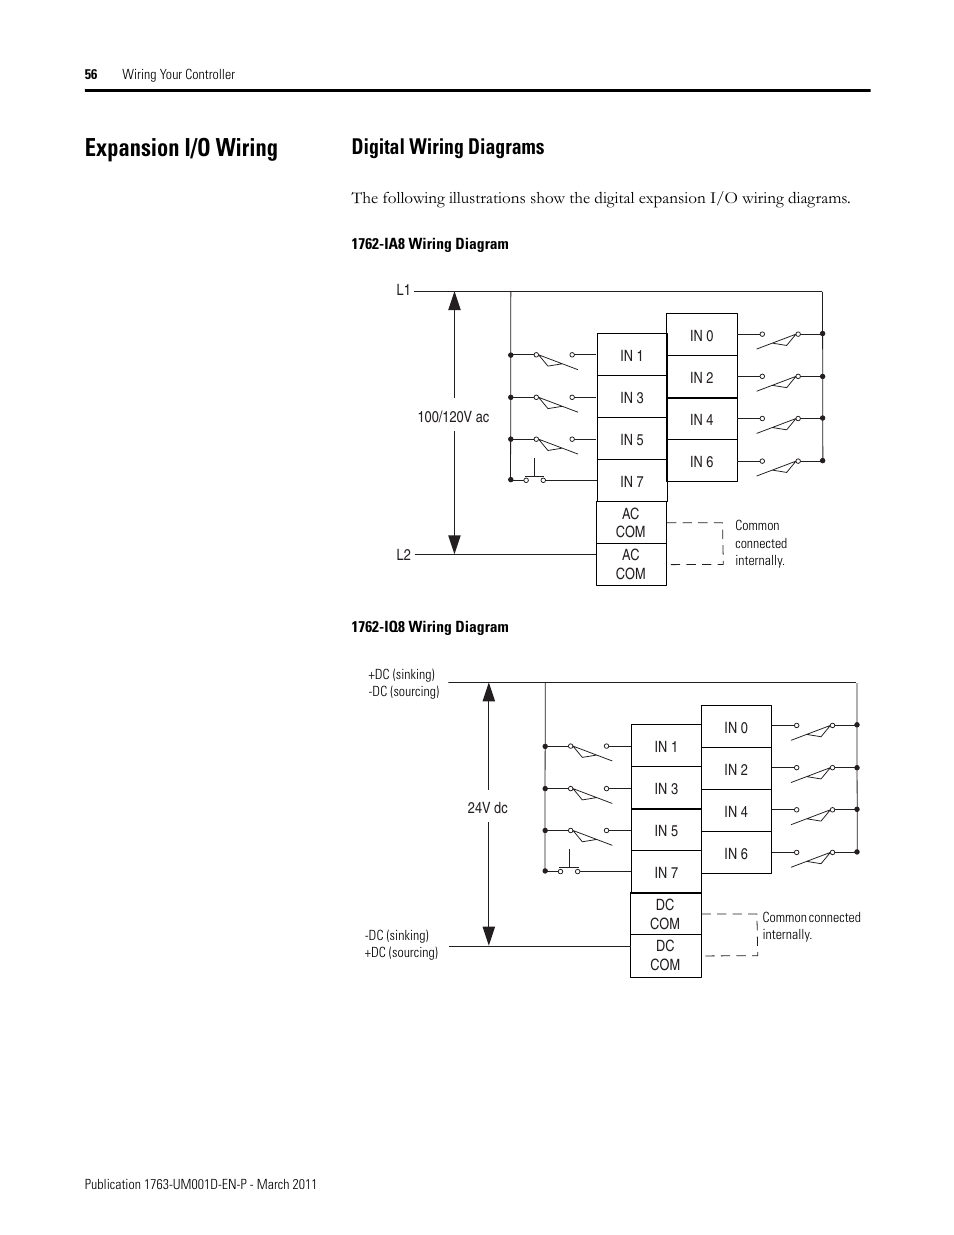 Expansion i/o wiring, Digital wiring diagrams | Rockwell Automation